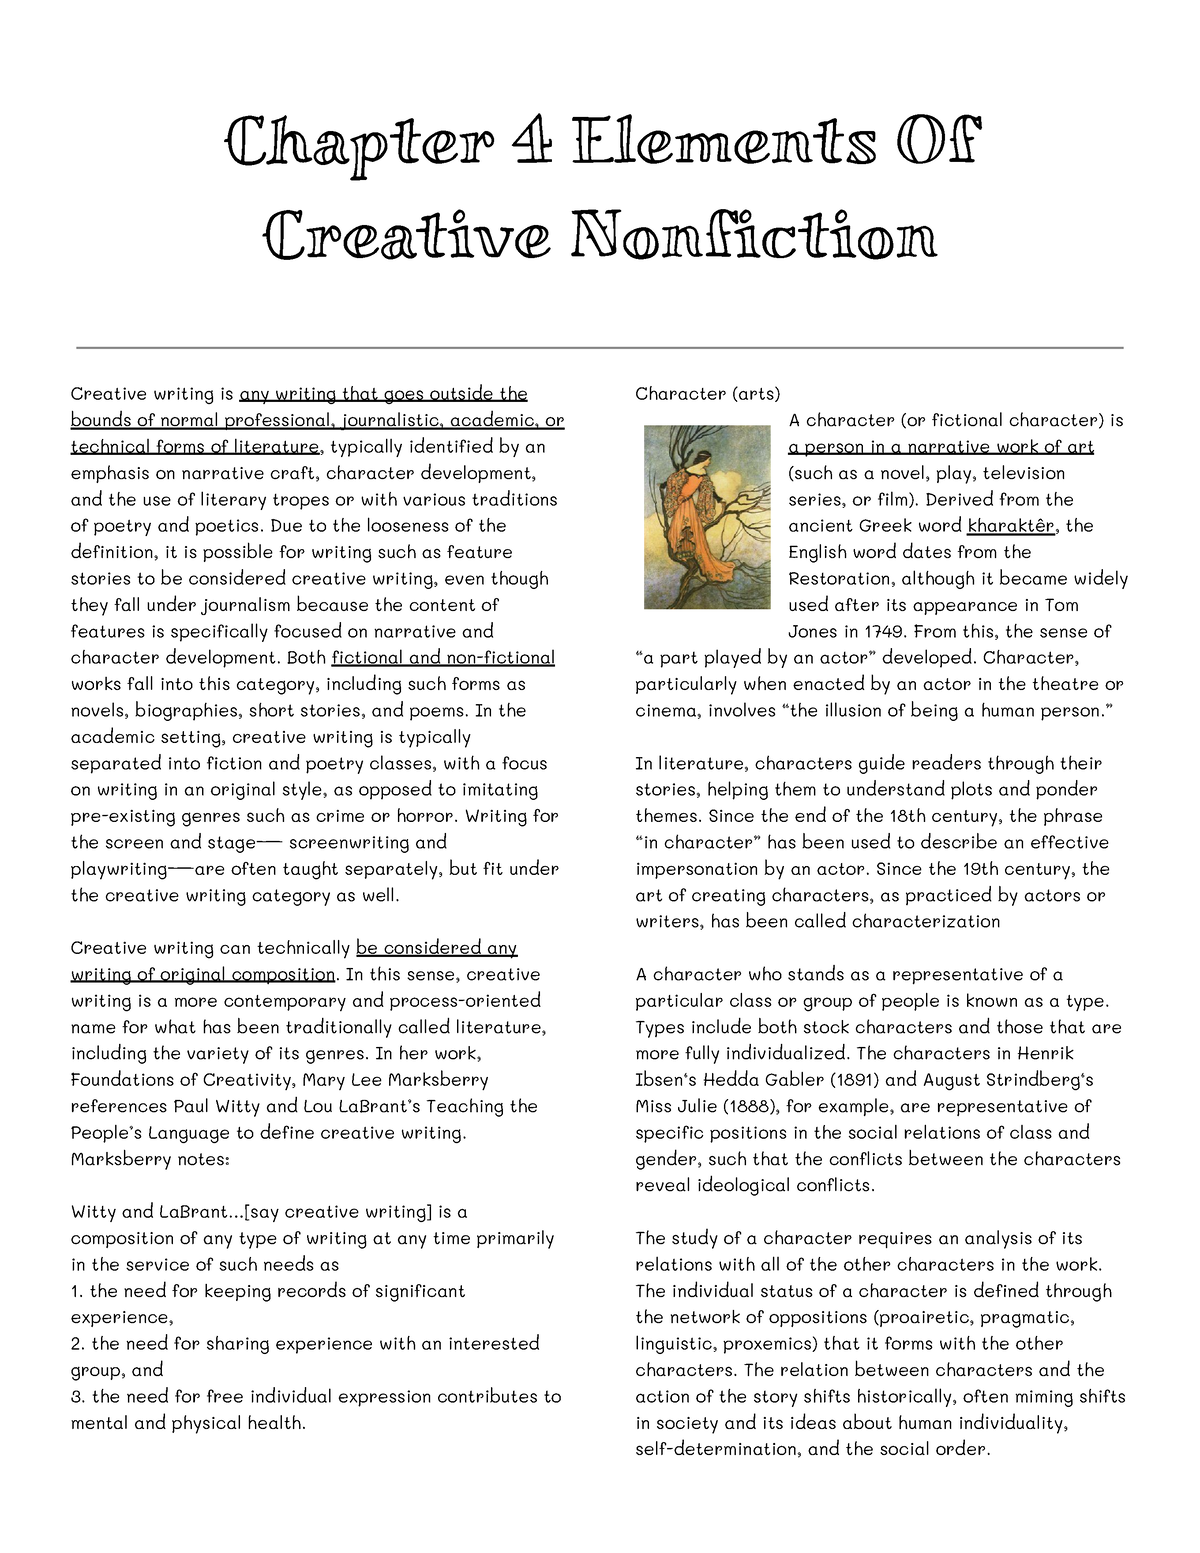 nonfiction creative writing examples